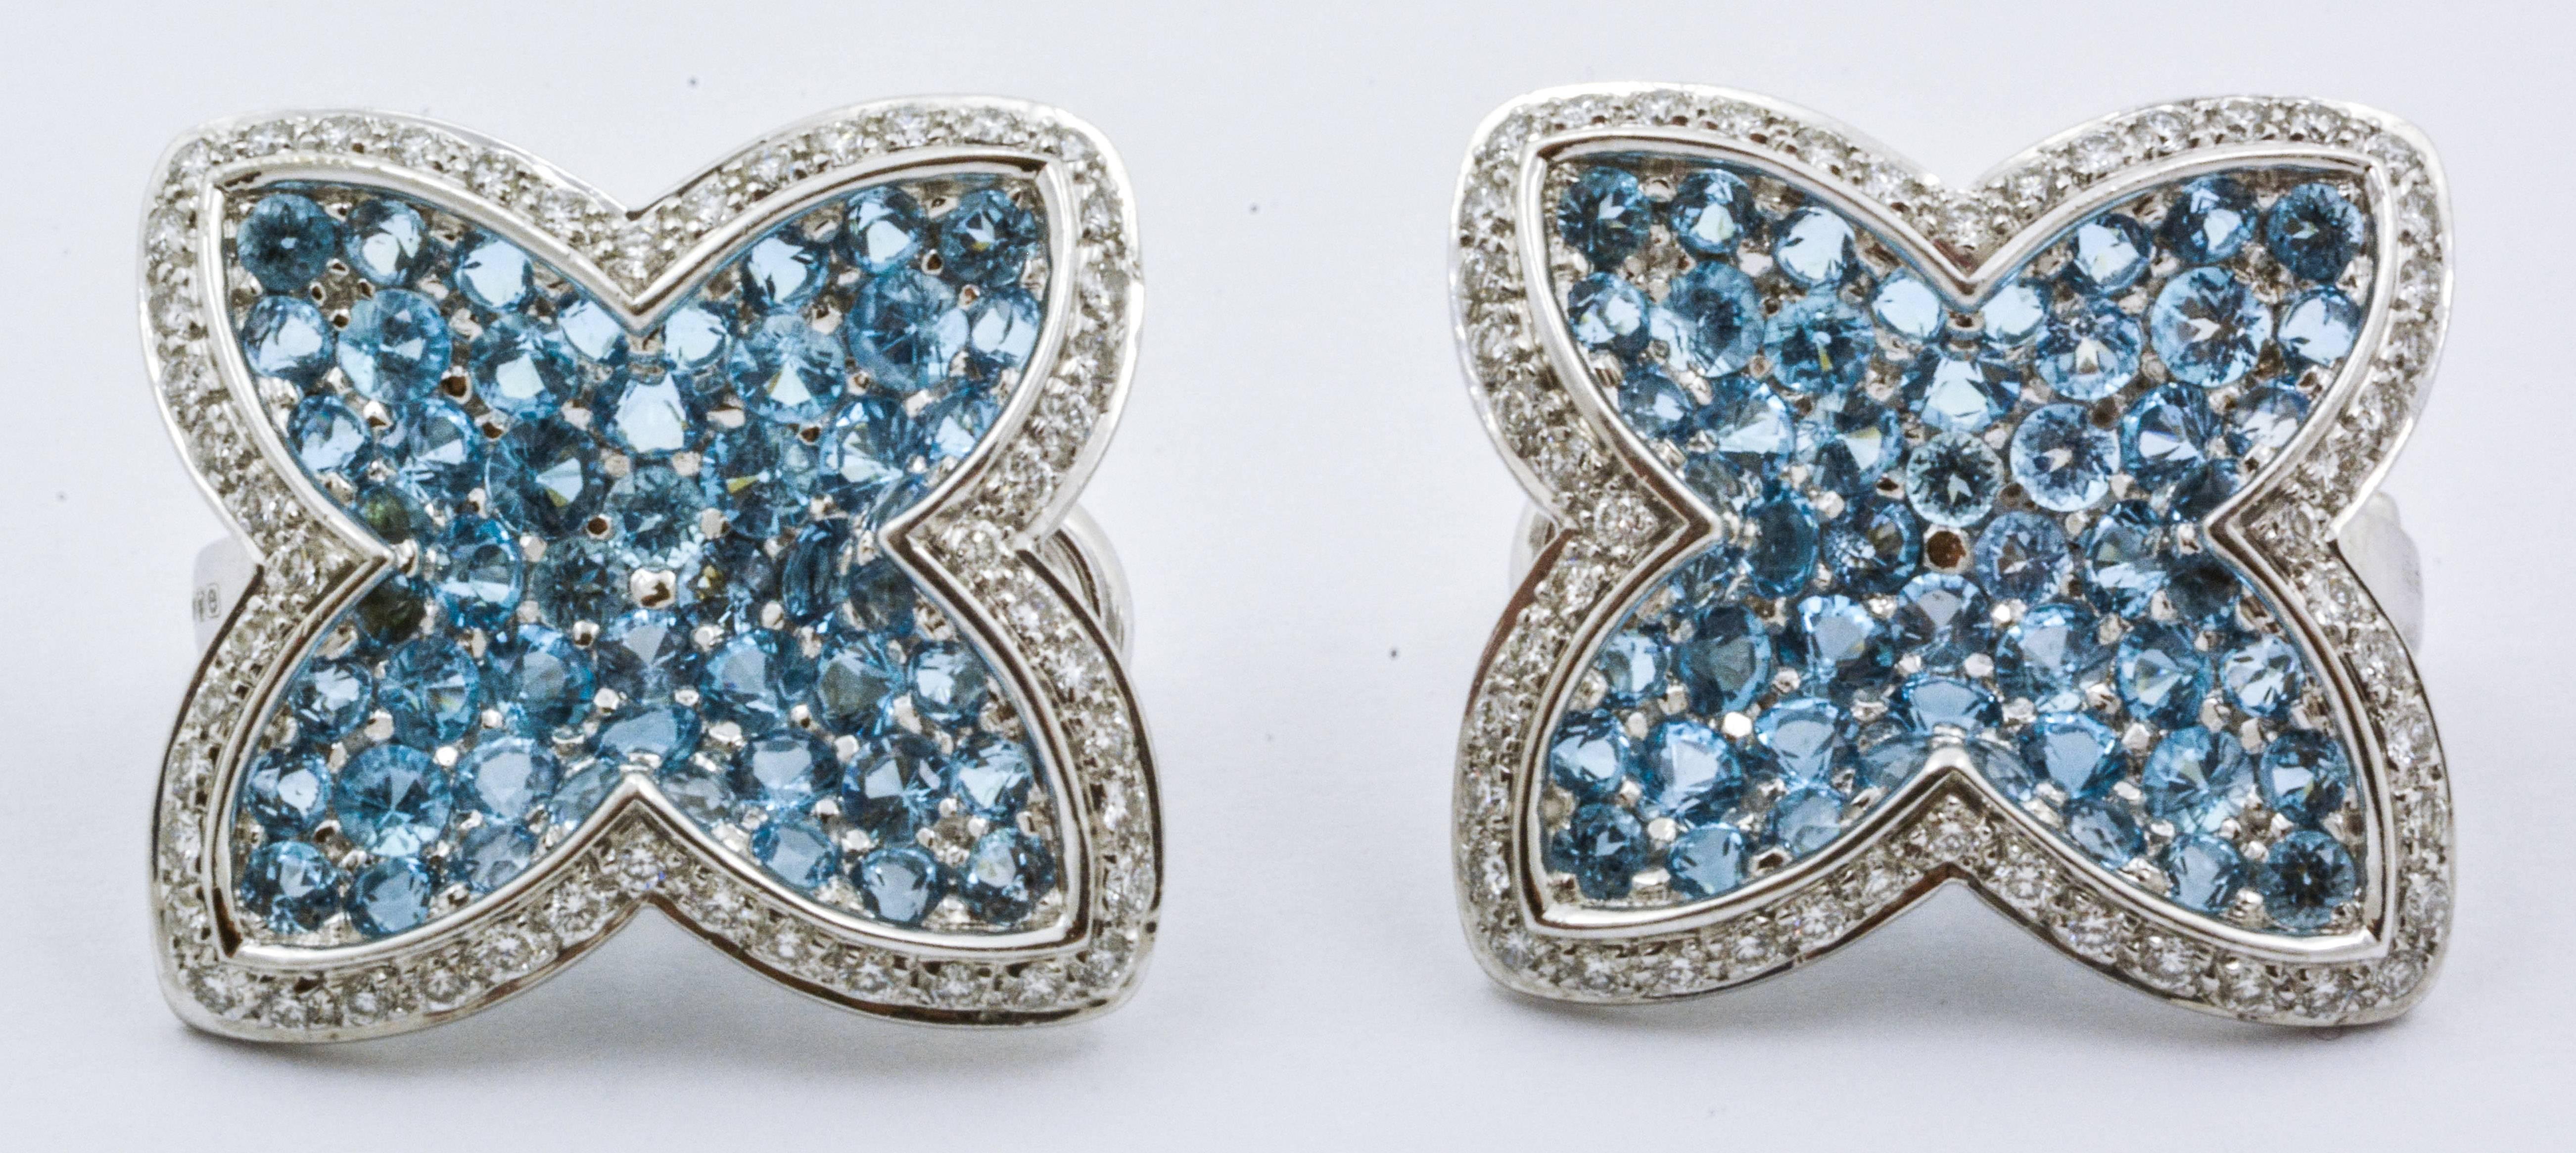 These enchanting Rodney Rayner clip-on earrings feature shimmering 18 karat white gold, sparkling blue topaz, and lovely accent diamonds. The blue topaz gems weigh approximately 5.52 carats combined, while the diamonds are approximately 0.89 carats